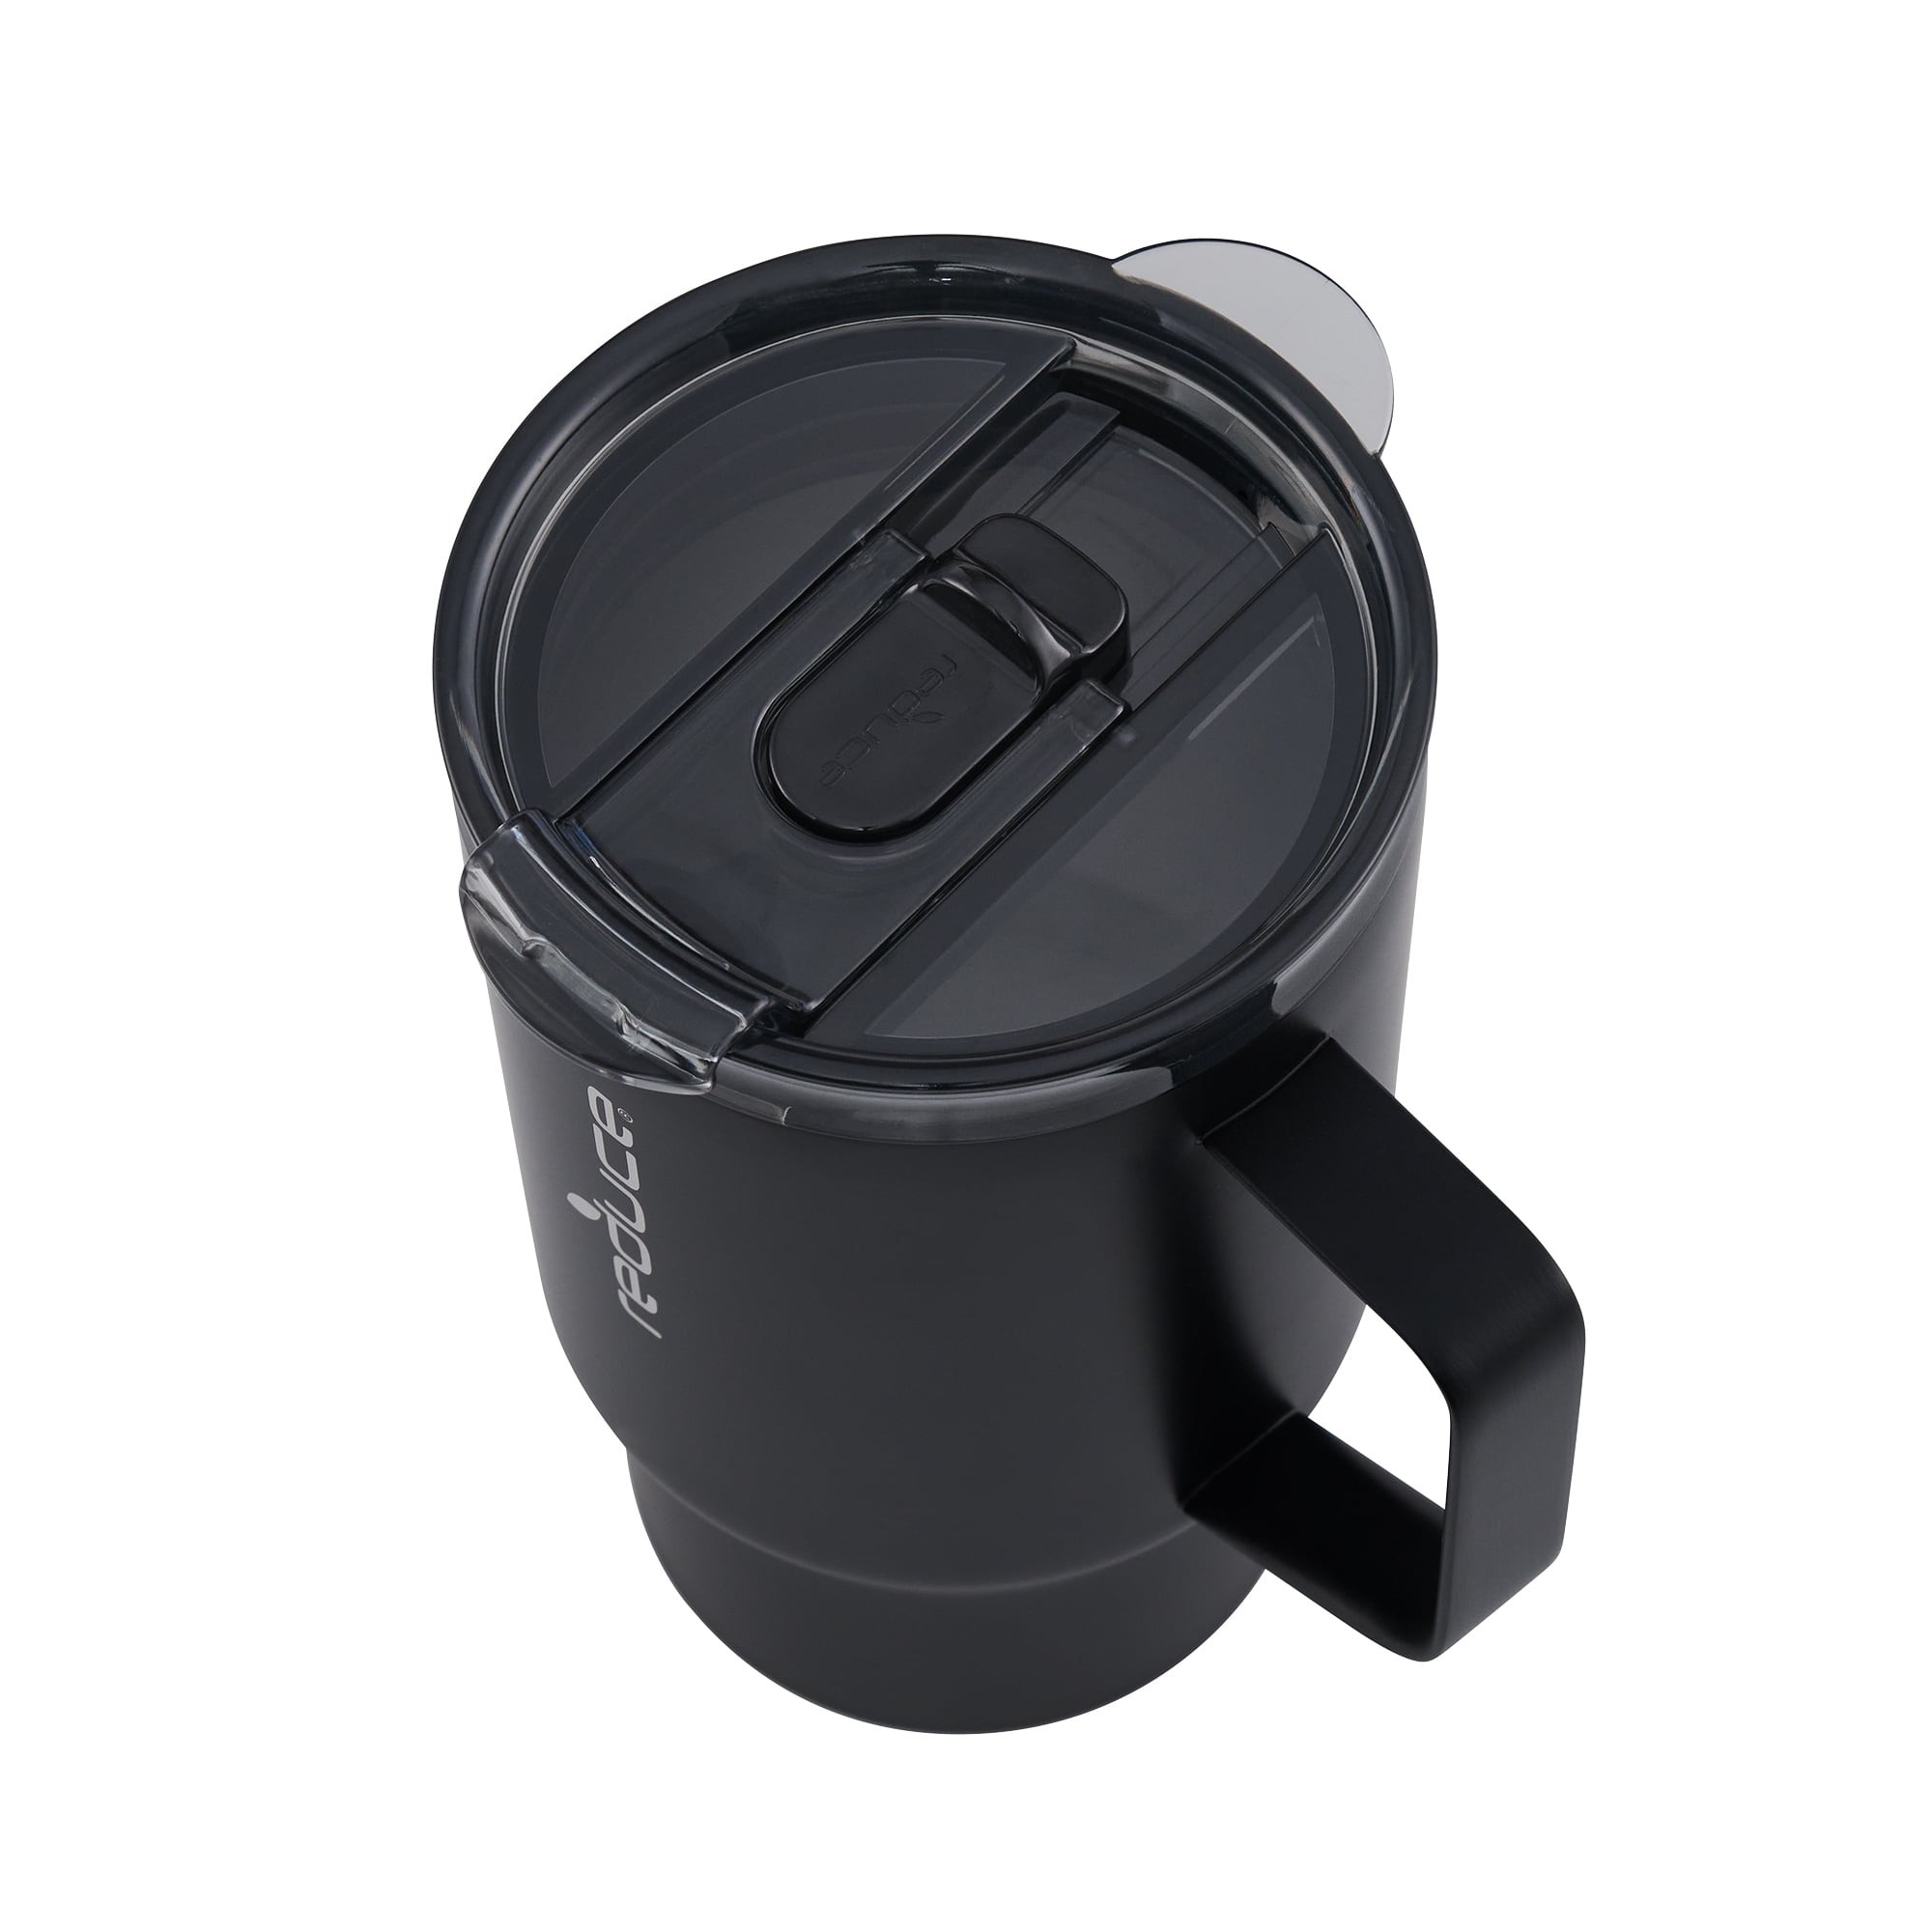 Copco Stainless Steel Insulated Travel Mug With Easy Grip Handle